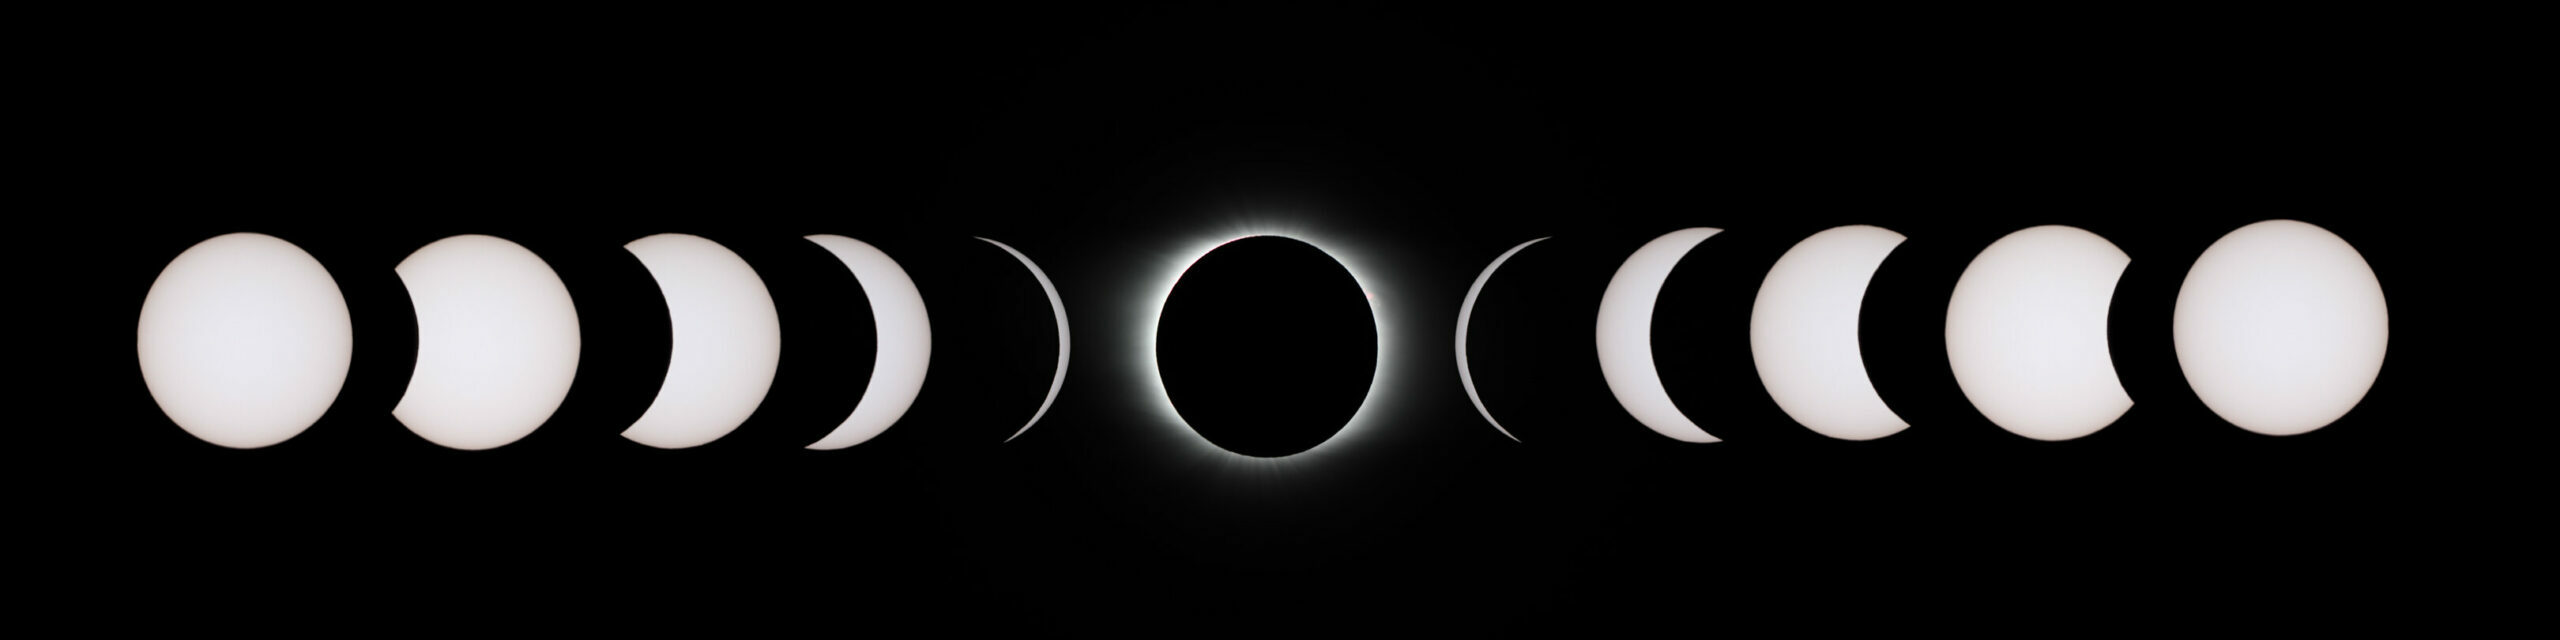 Solar eclipse phases